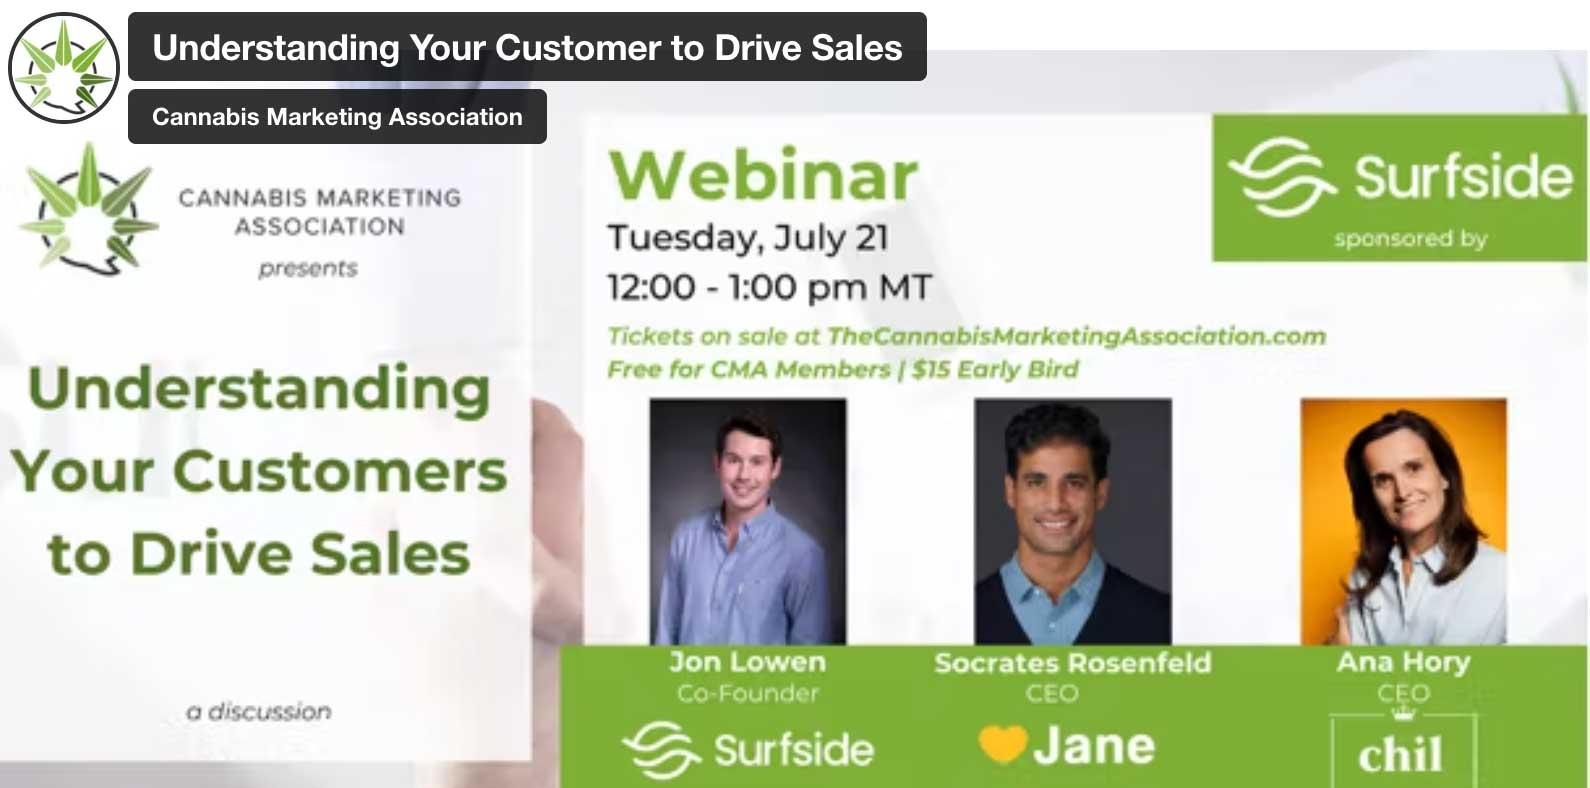 CMA: Understanding Your Customers to Drive Sales